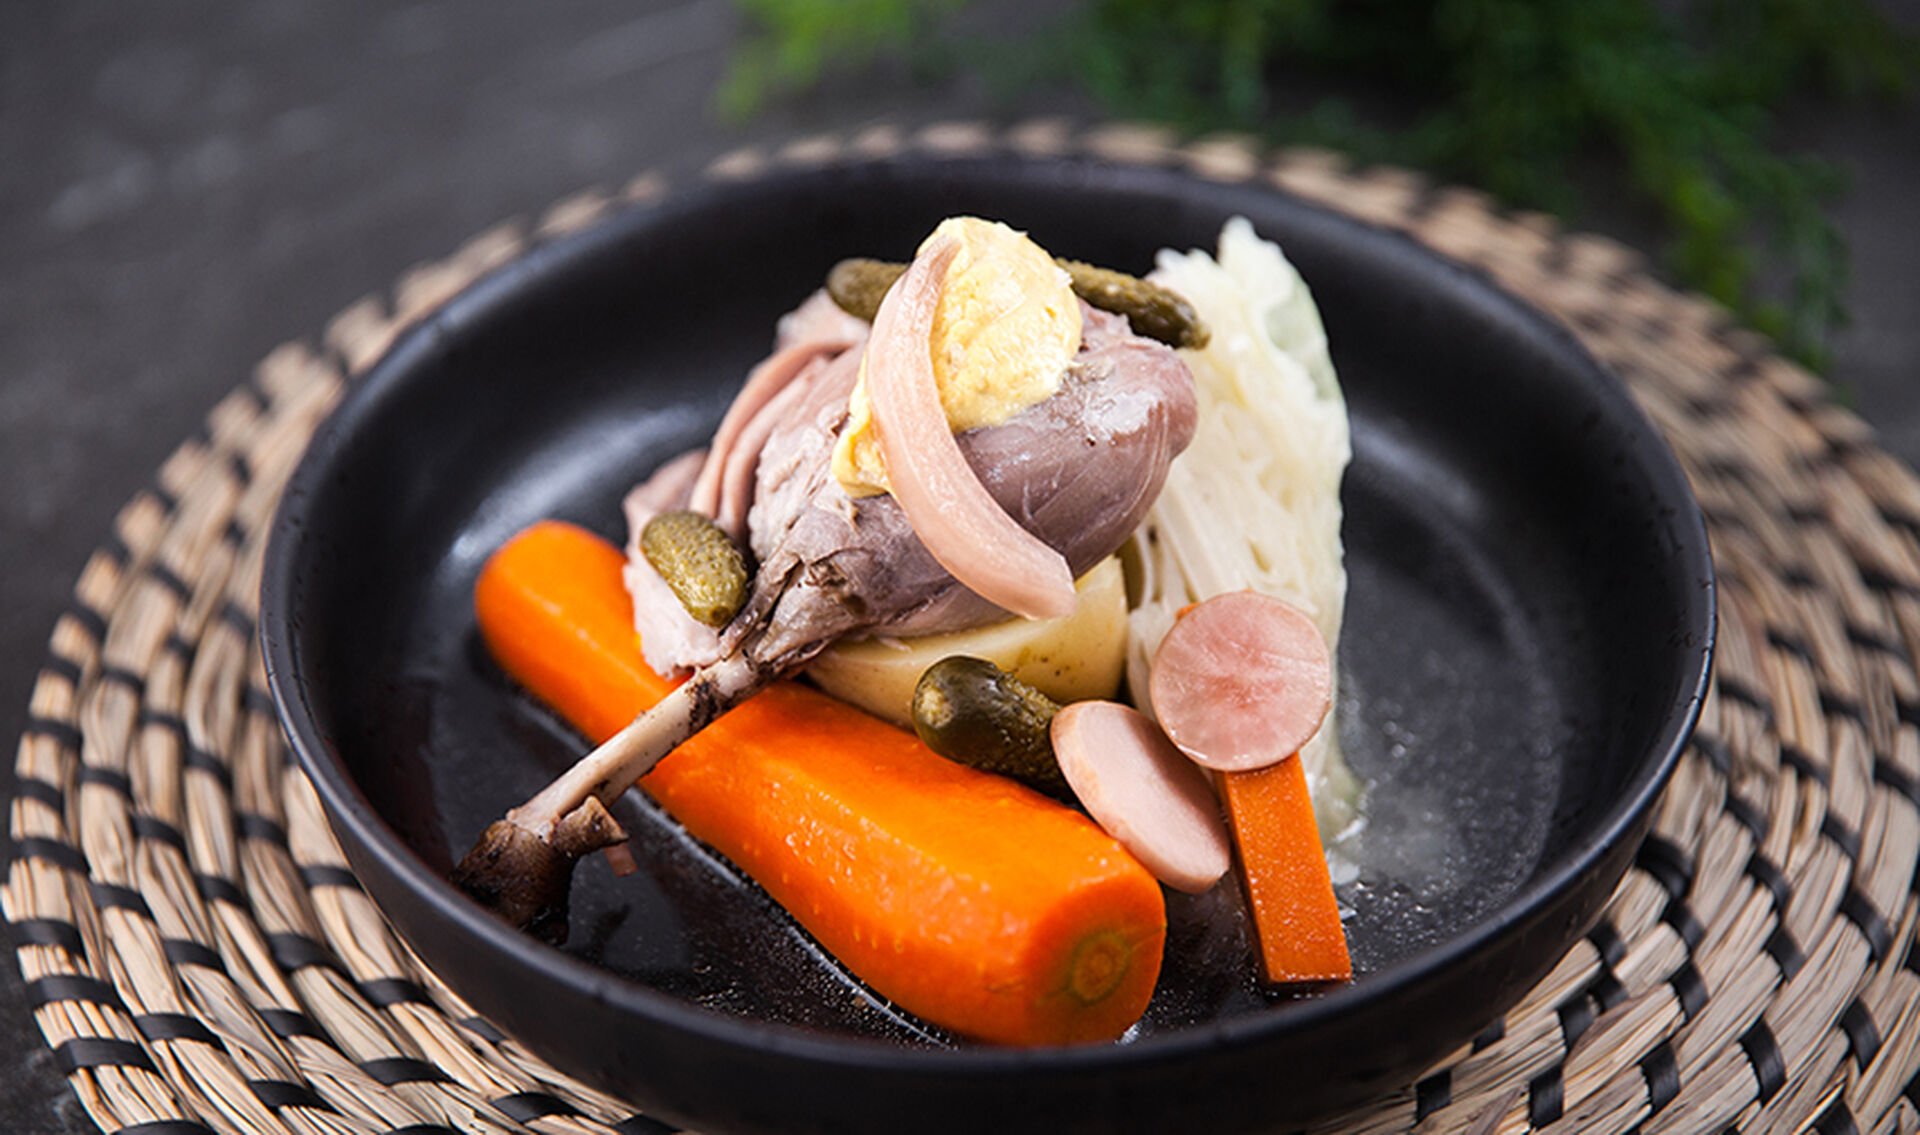 Pot au feu recipe updated and healthy for modern cooks – The Denver Post